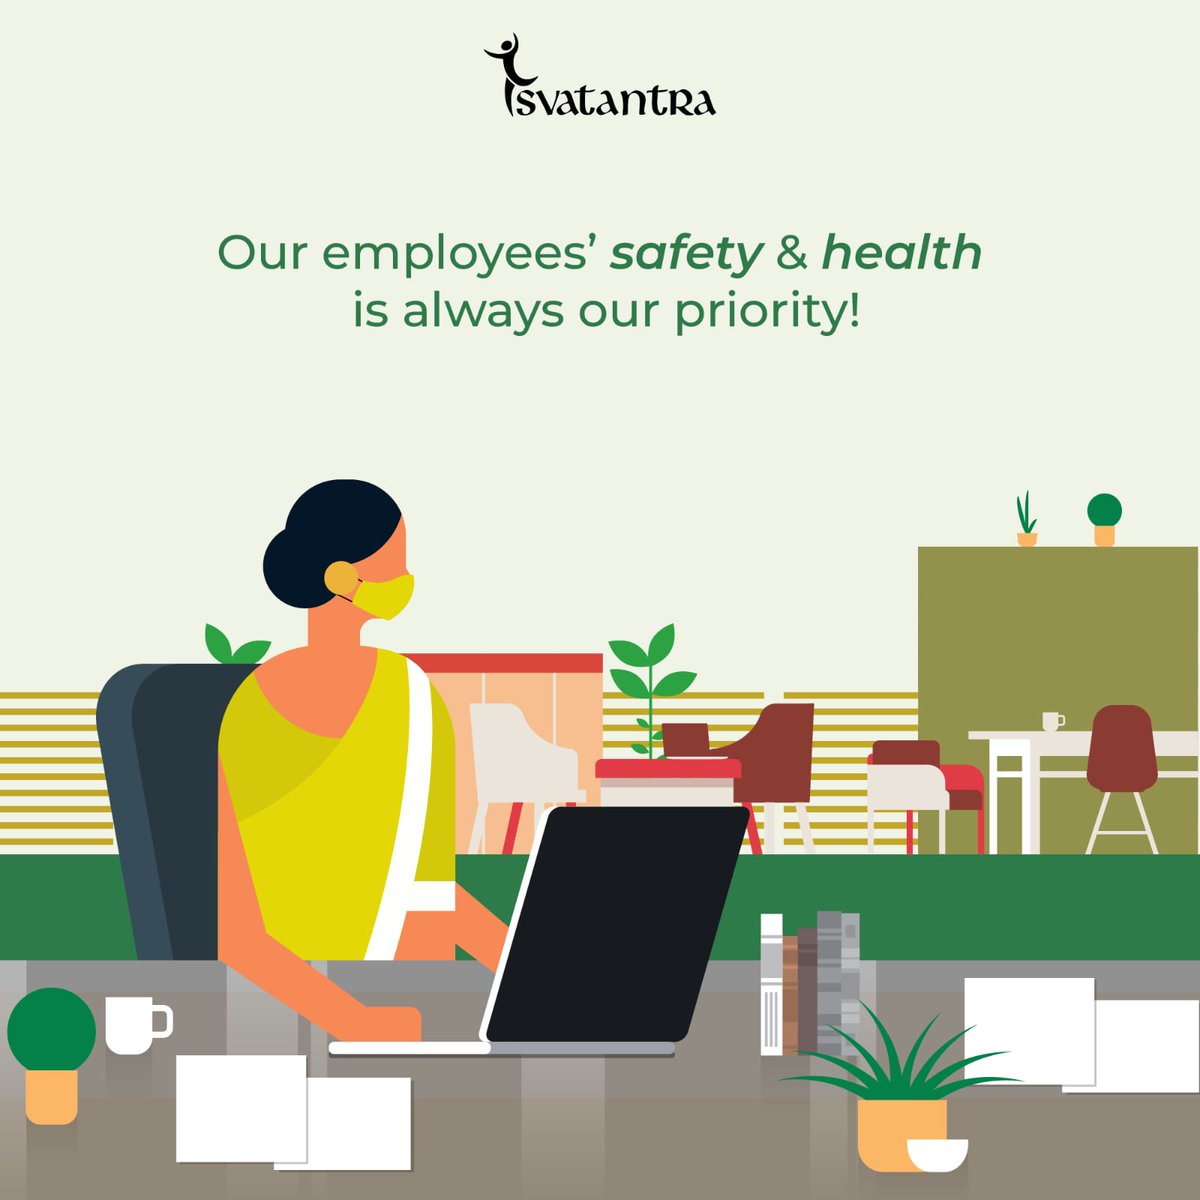 At the forefront of our work culture lies the safety & health of our employees. This is what makes us the Best Place to Work!

#SvatantraMicrofin #WorldHealthandSafetyatWork #HealthyWorkplaces.